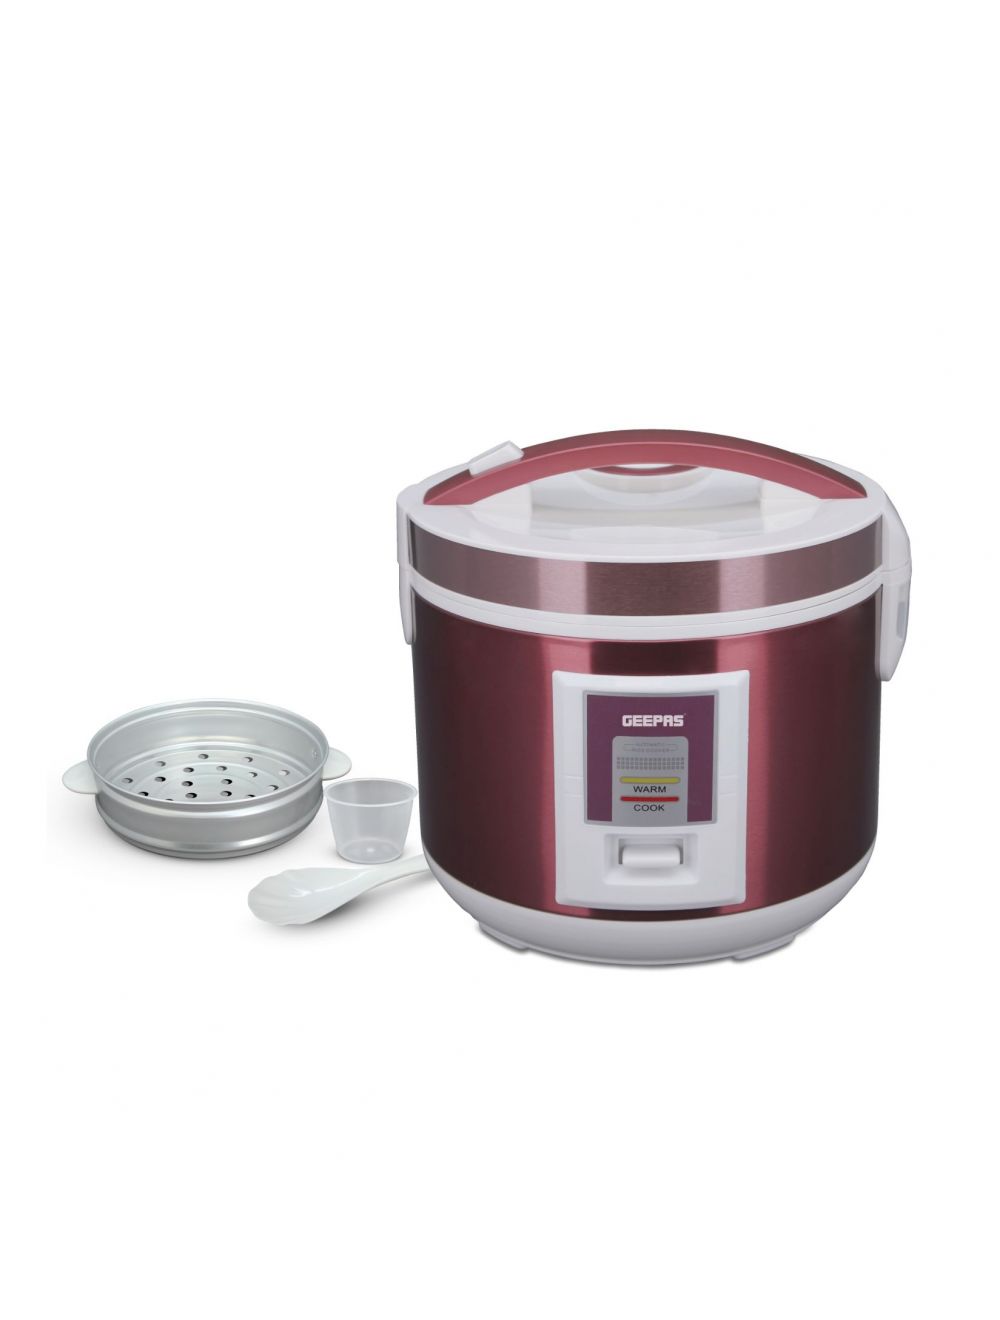 Geepas GRC4328 Rice Cooker with Non-stick Inner Pot, 1.5L